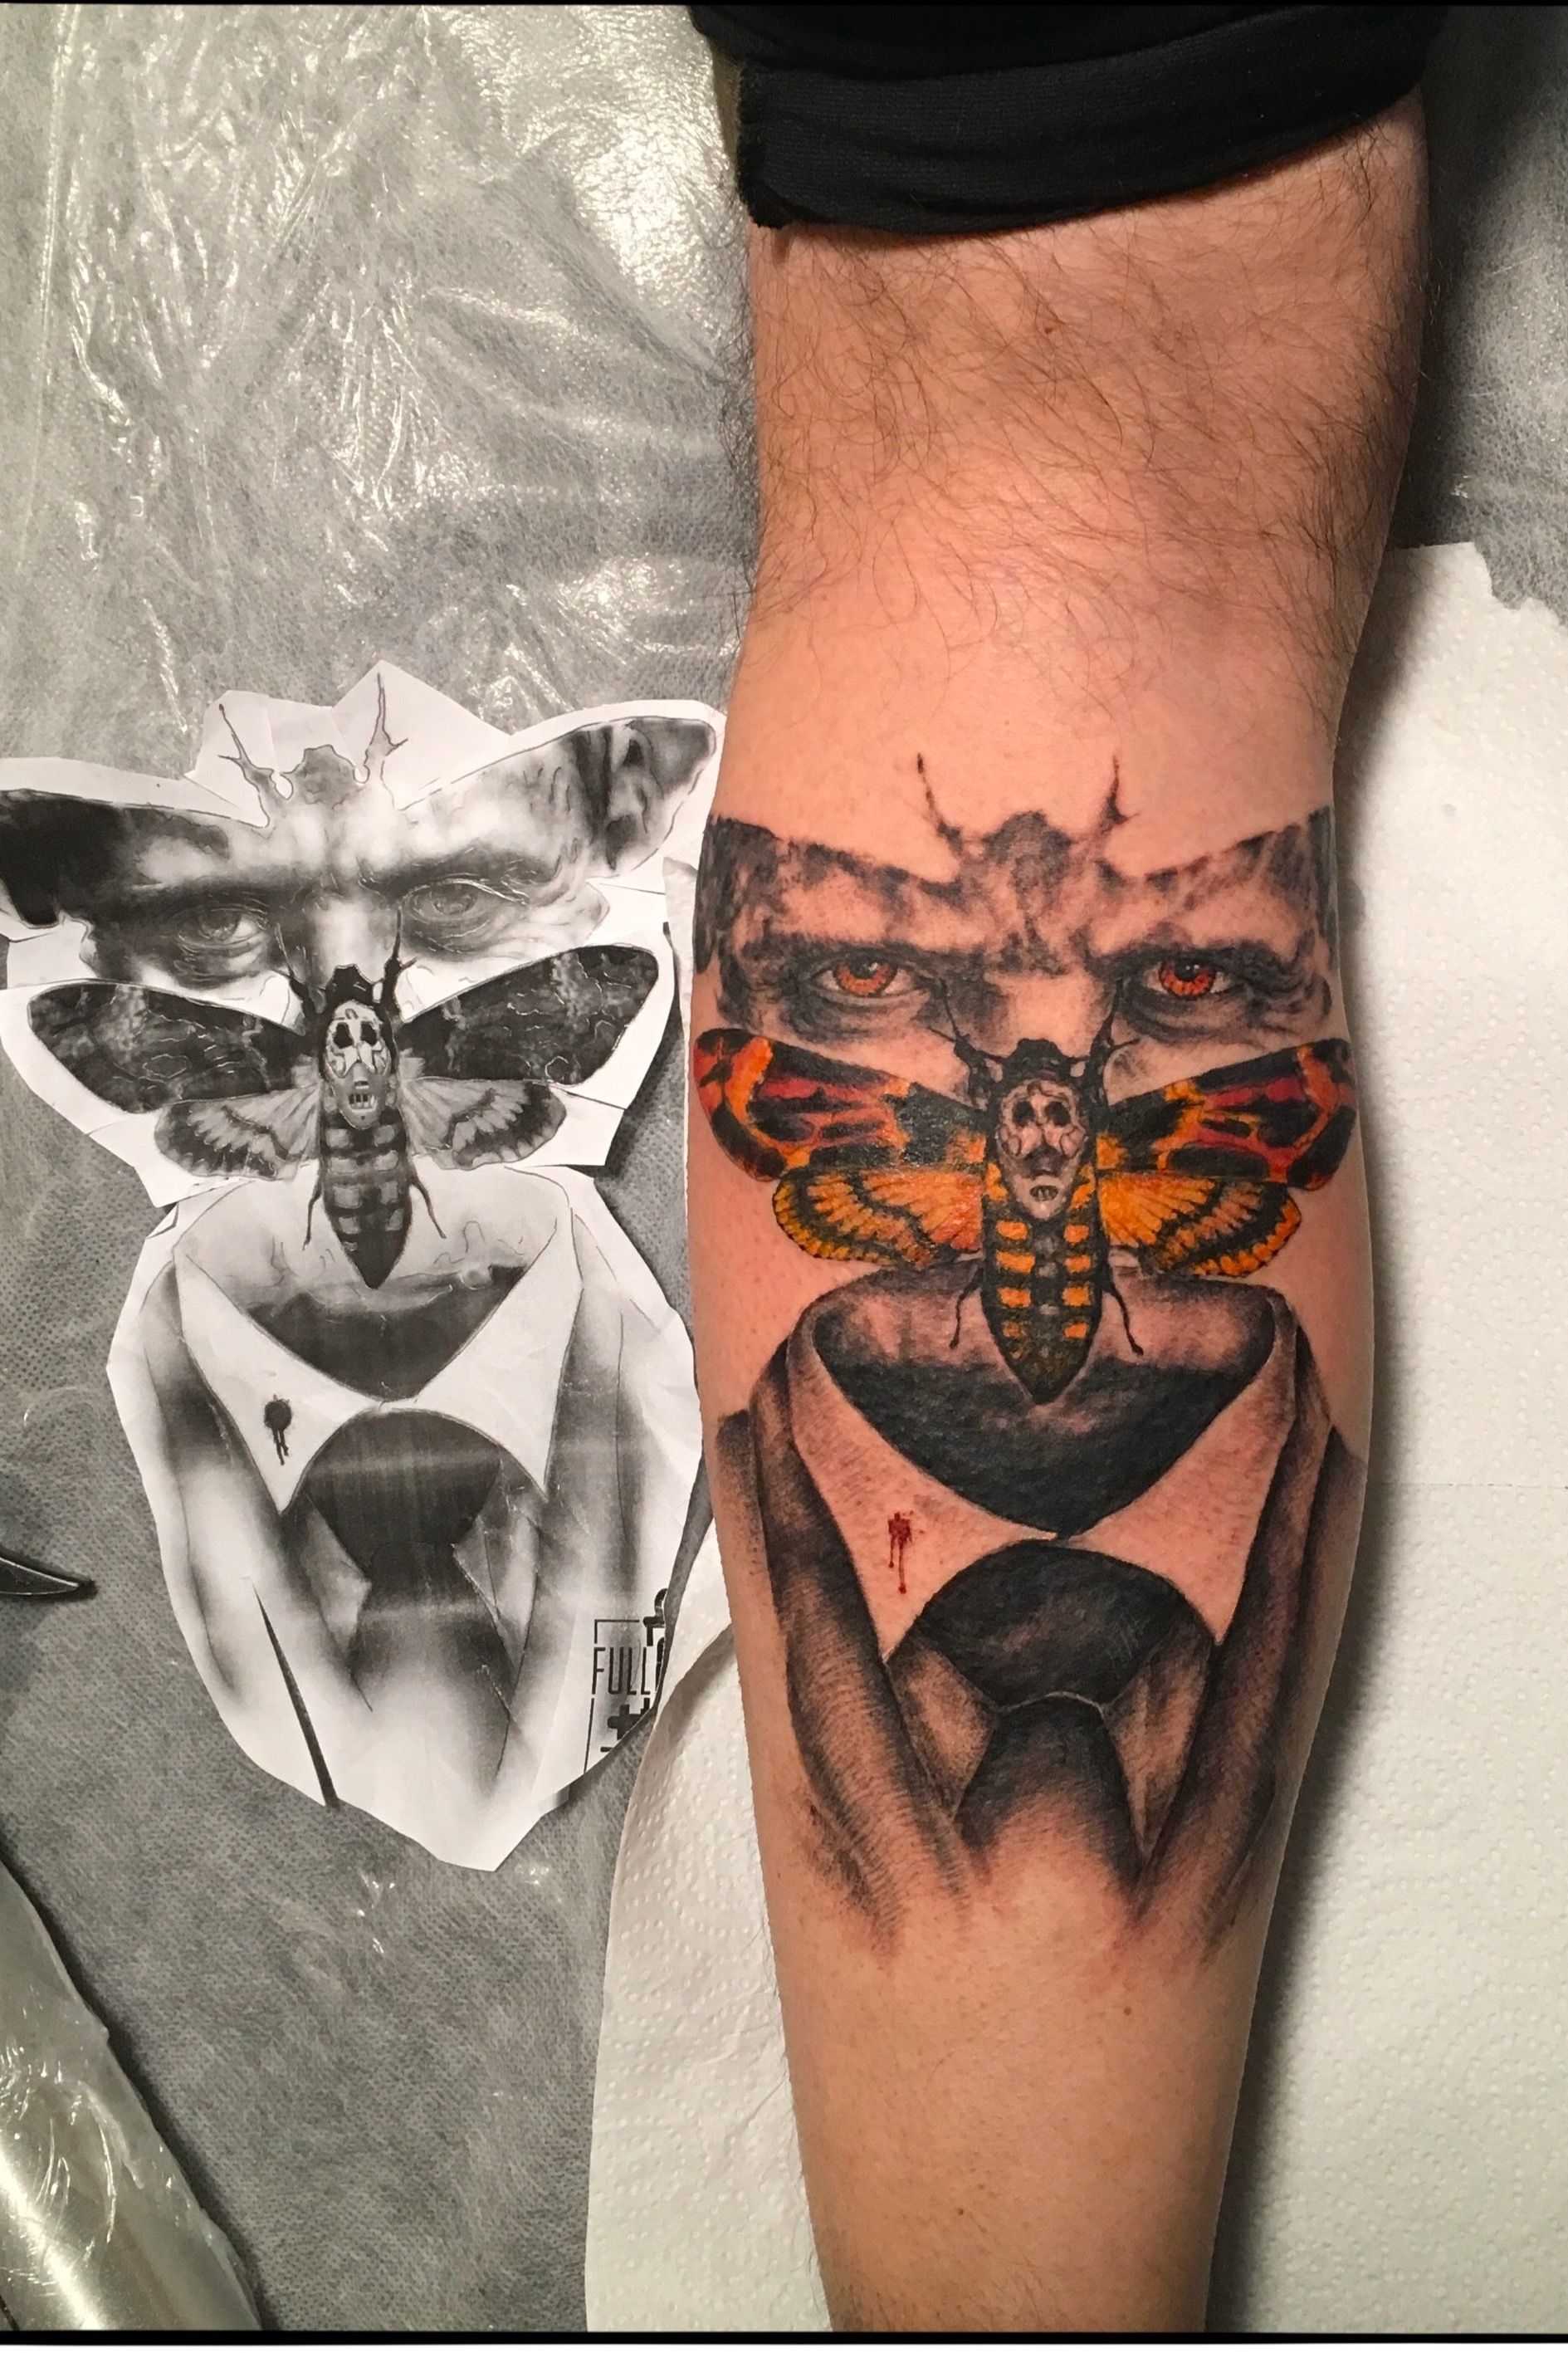 Tattoo uploaded by Shock Connery  Hannibal silence of the lambs maniac  movie actor villain  Tattoodo